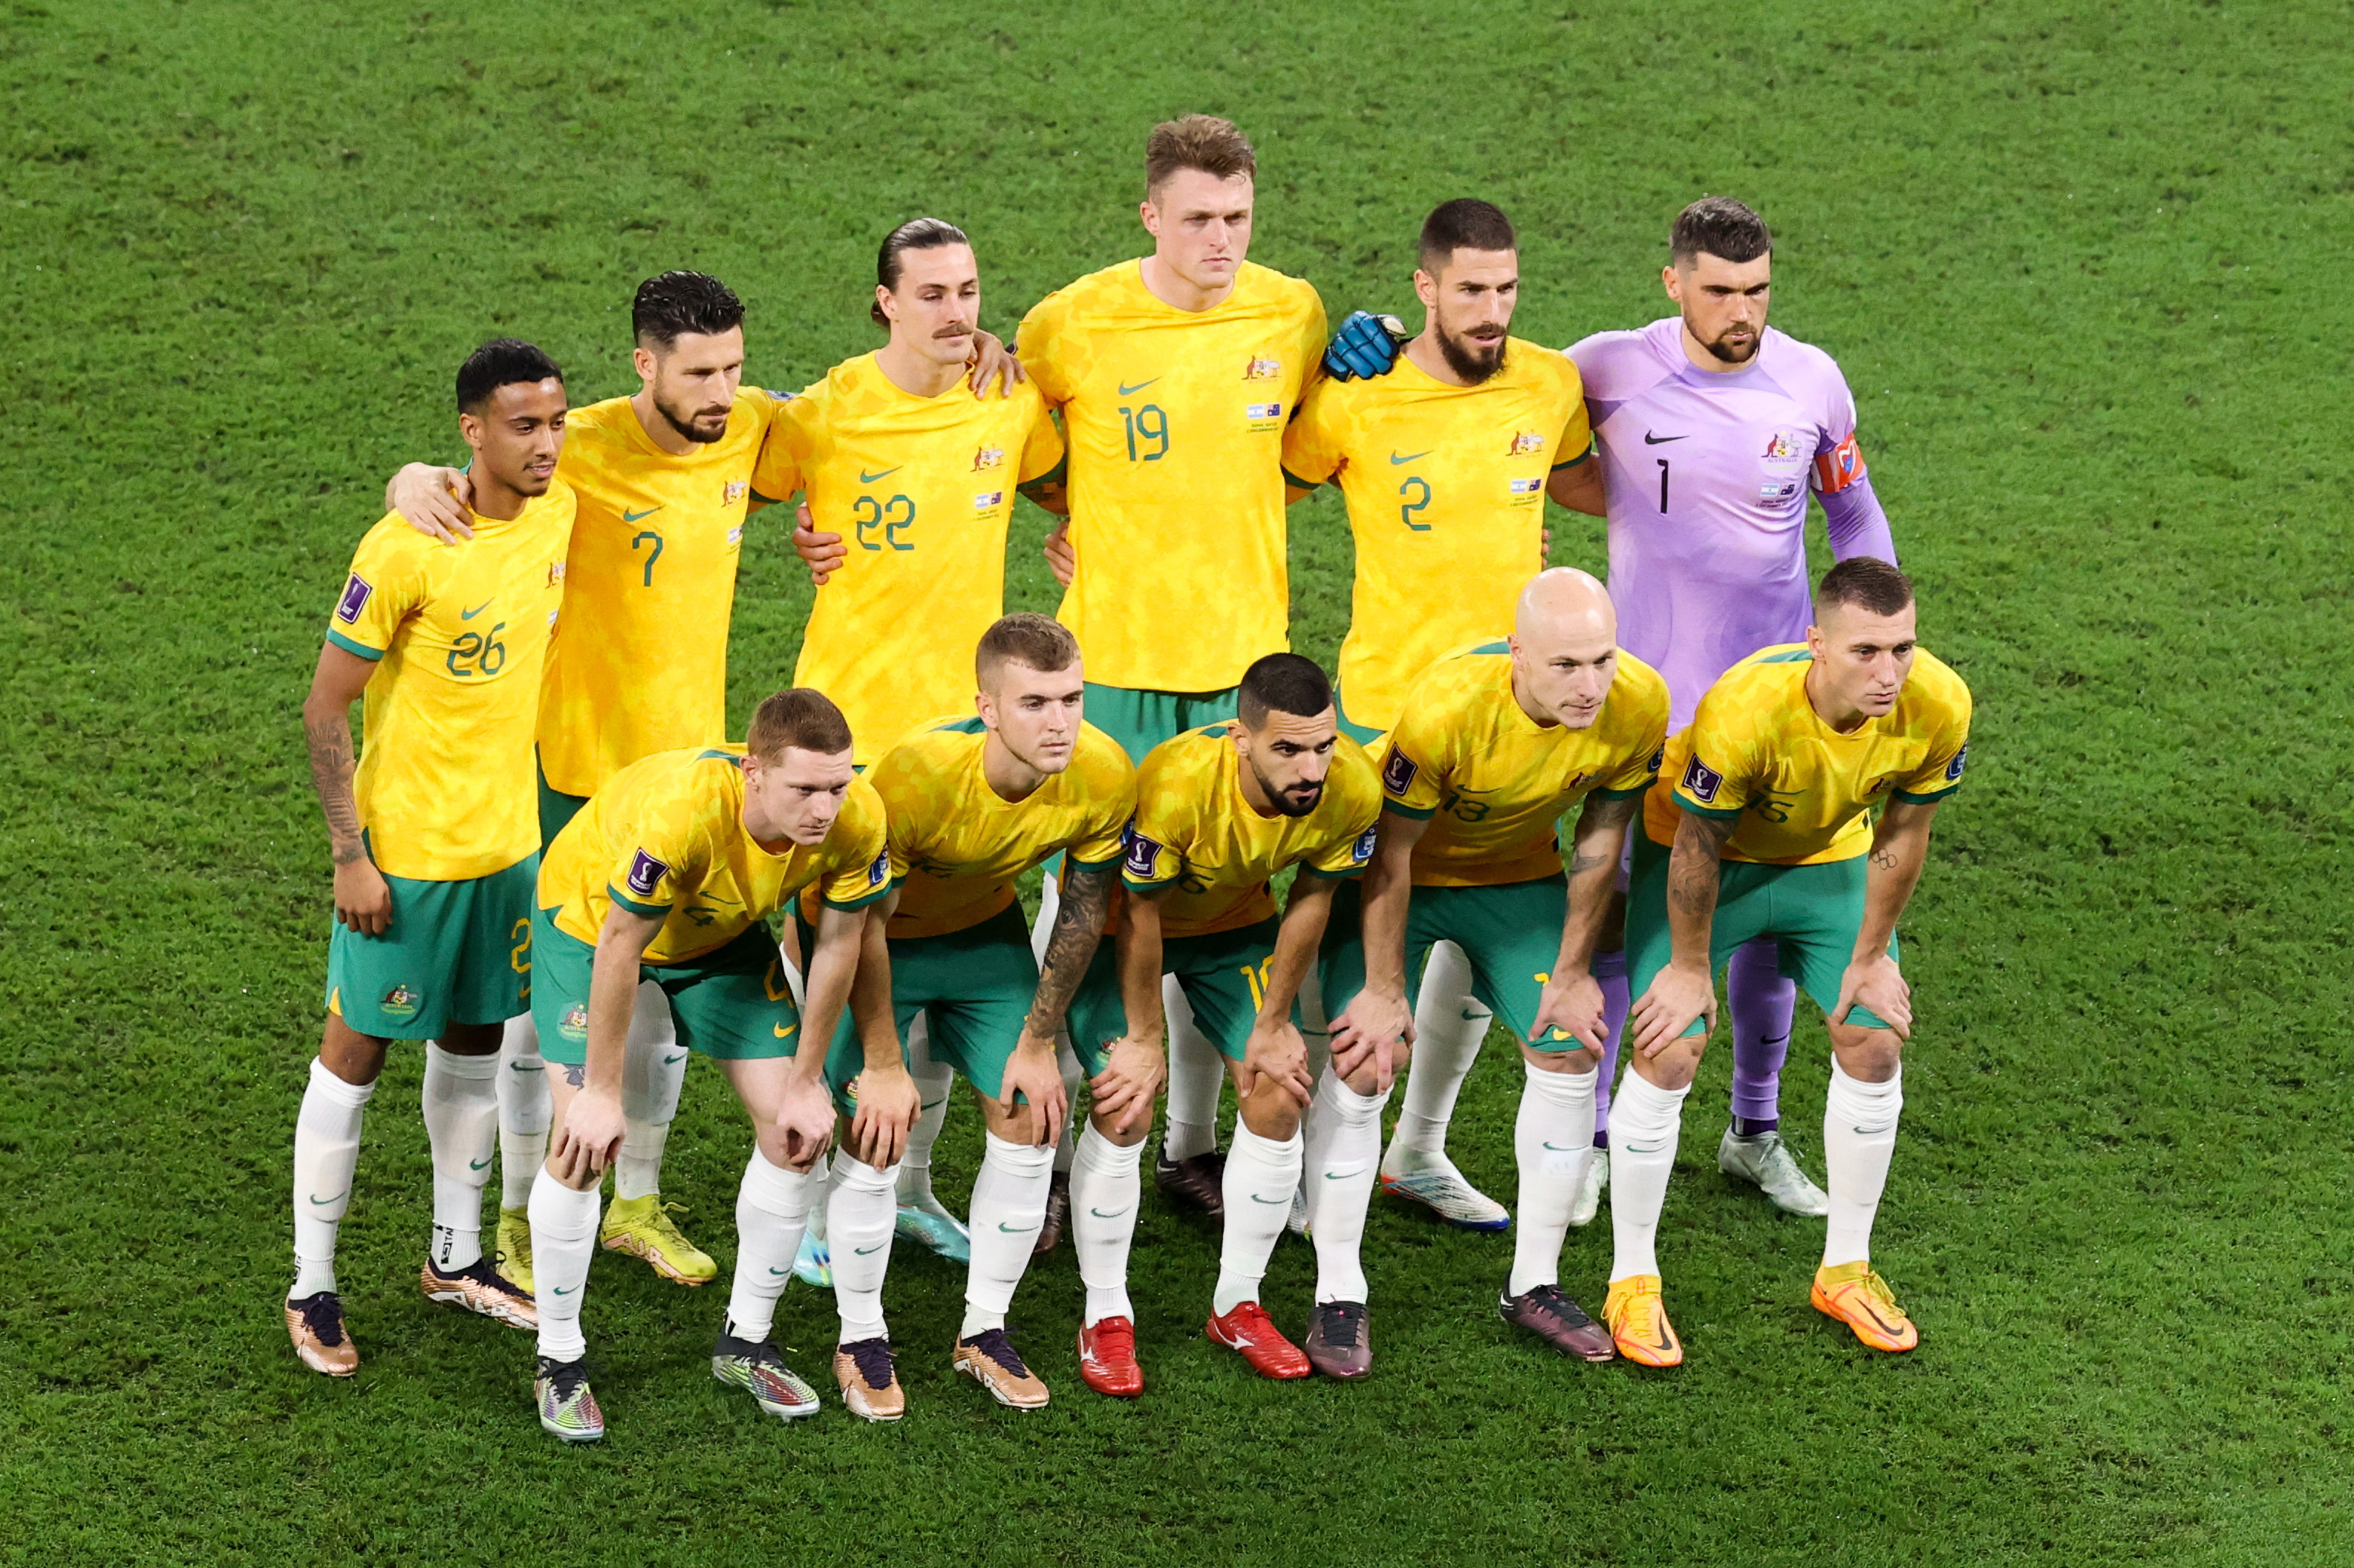 DOHA, QATAR - DECEMBER 03: Players of Australia line up for team photo during the FIFA World Cup Qatar 2022 Round of 16 match between Argentina and Australia at Ahmad Bin Ali Stadium on December 03, 2022 in Doha, Qatar. (Photo by Zhizhao Wu/Getty Images)